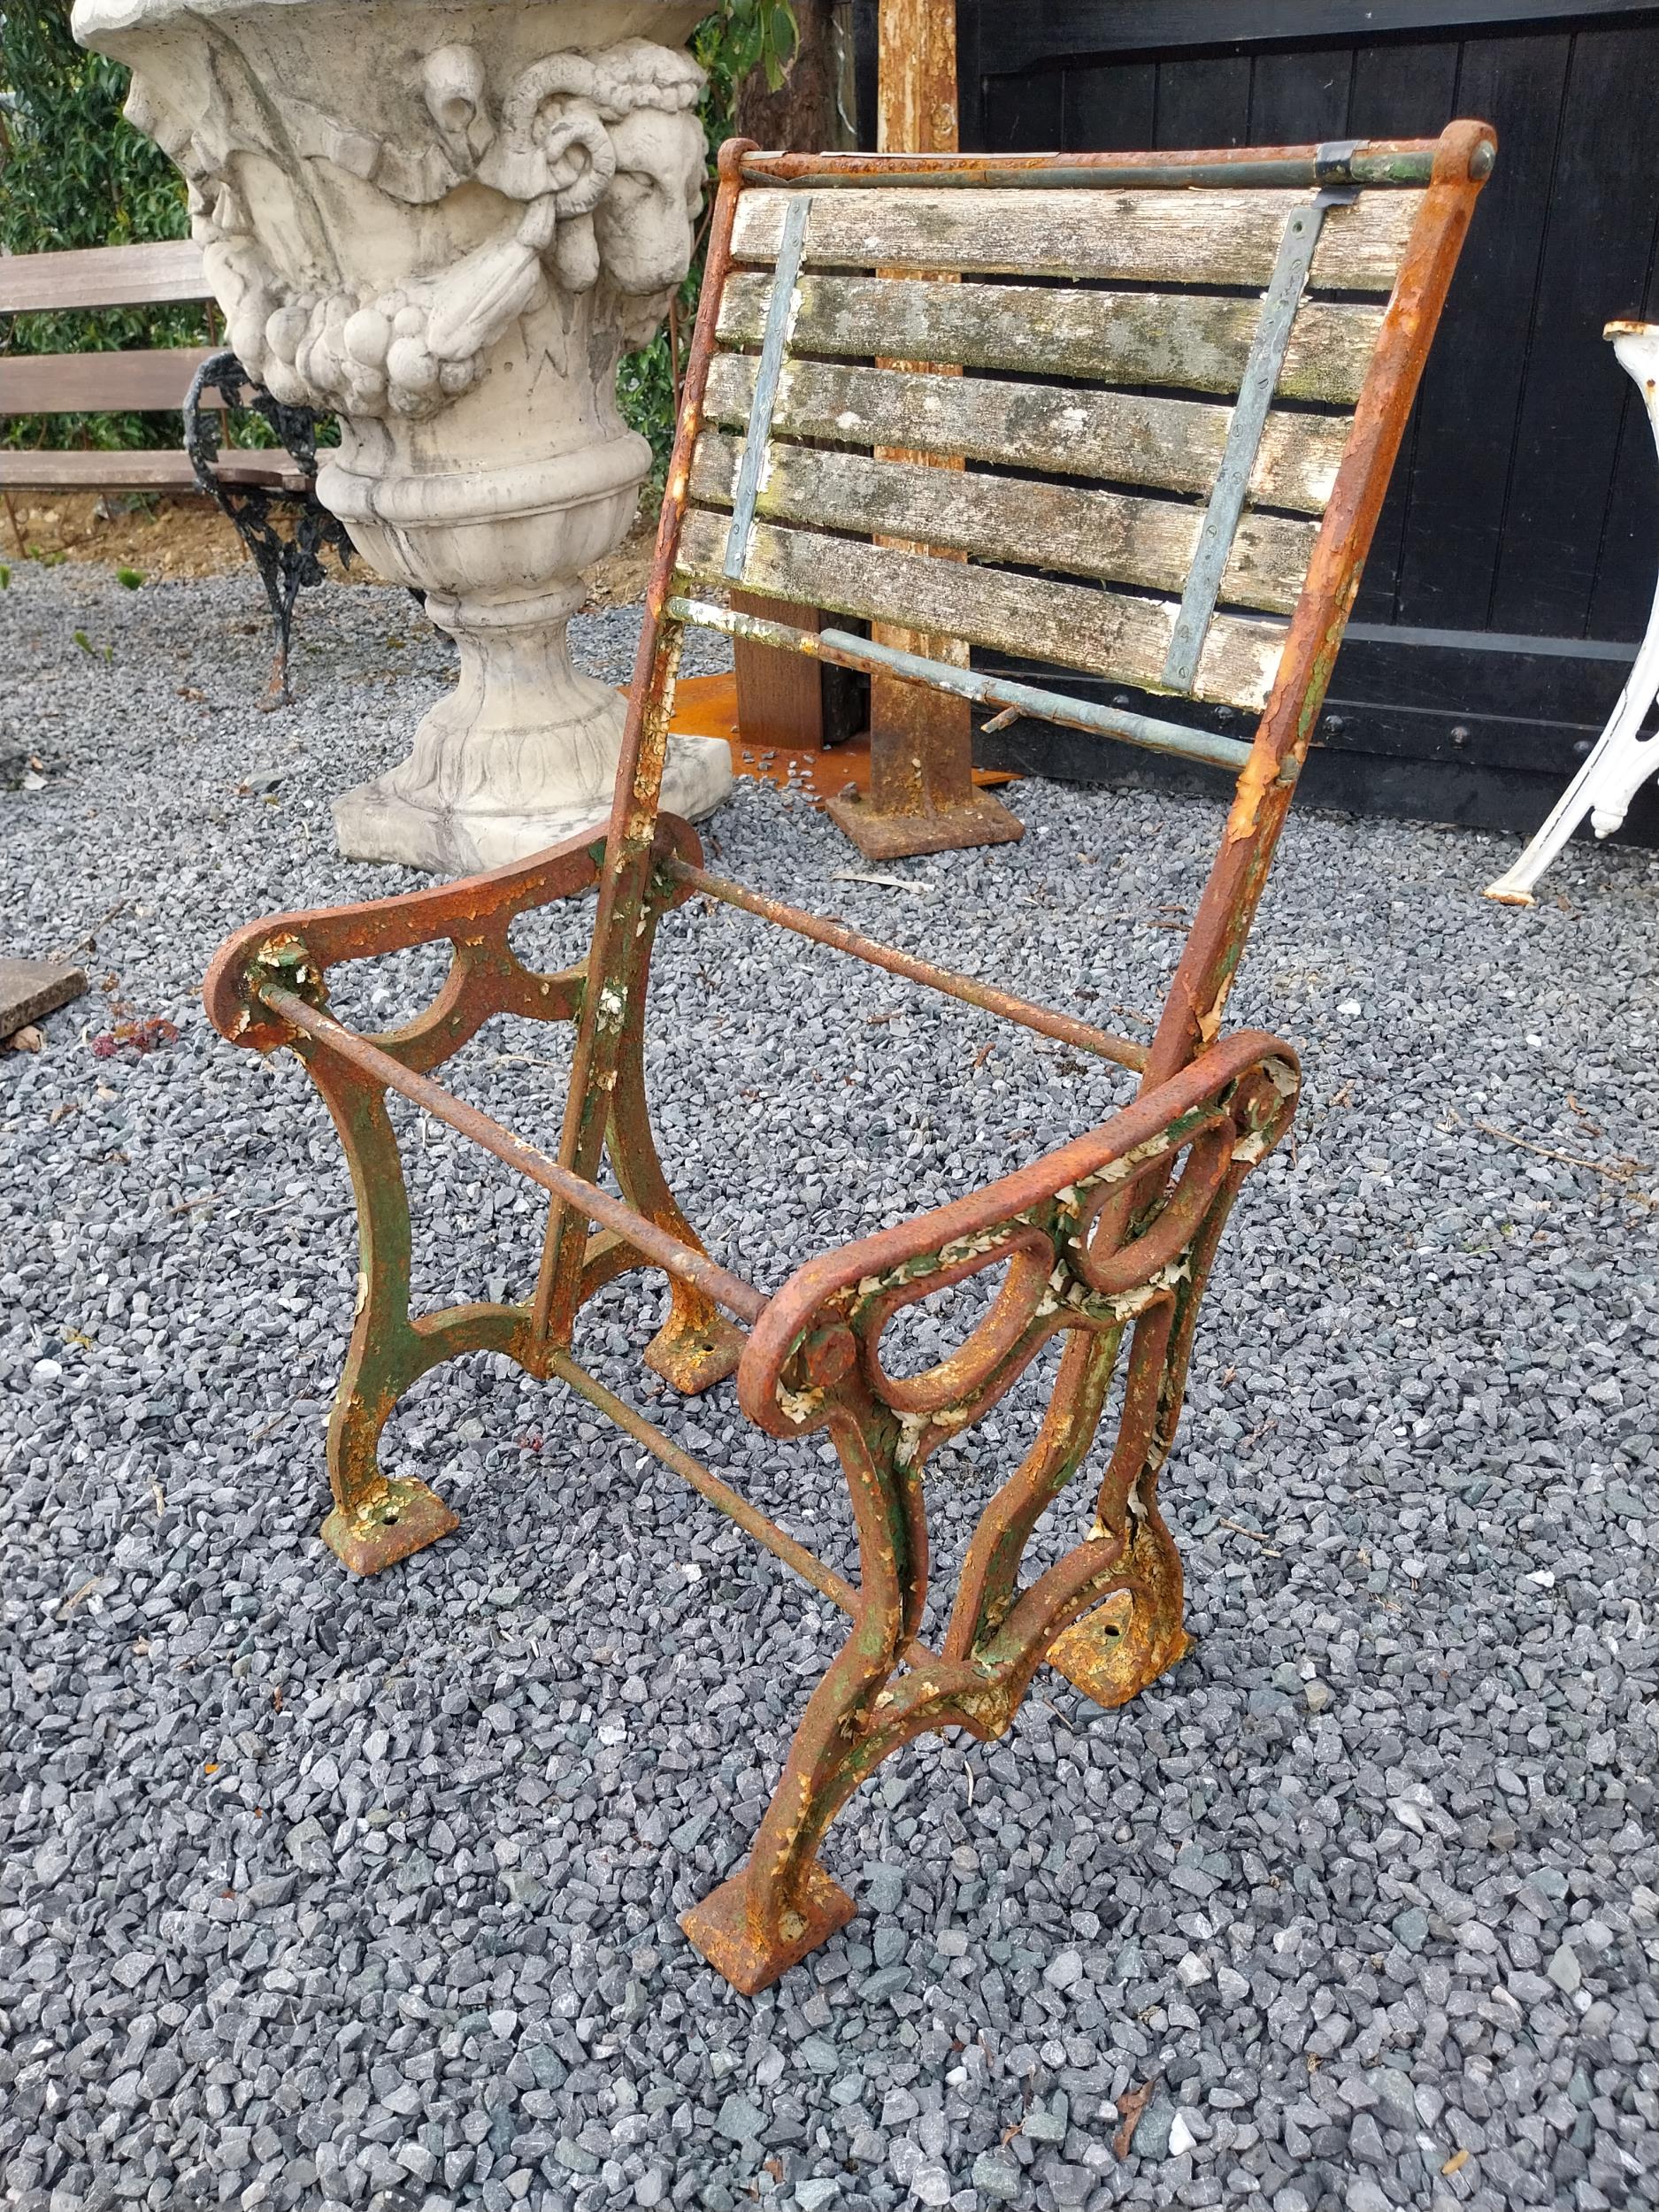 19th C. cast iron garden chair - in need of restoration {84 cm H x 50 cm W x 44 cm D}. - Image 2 of 2